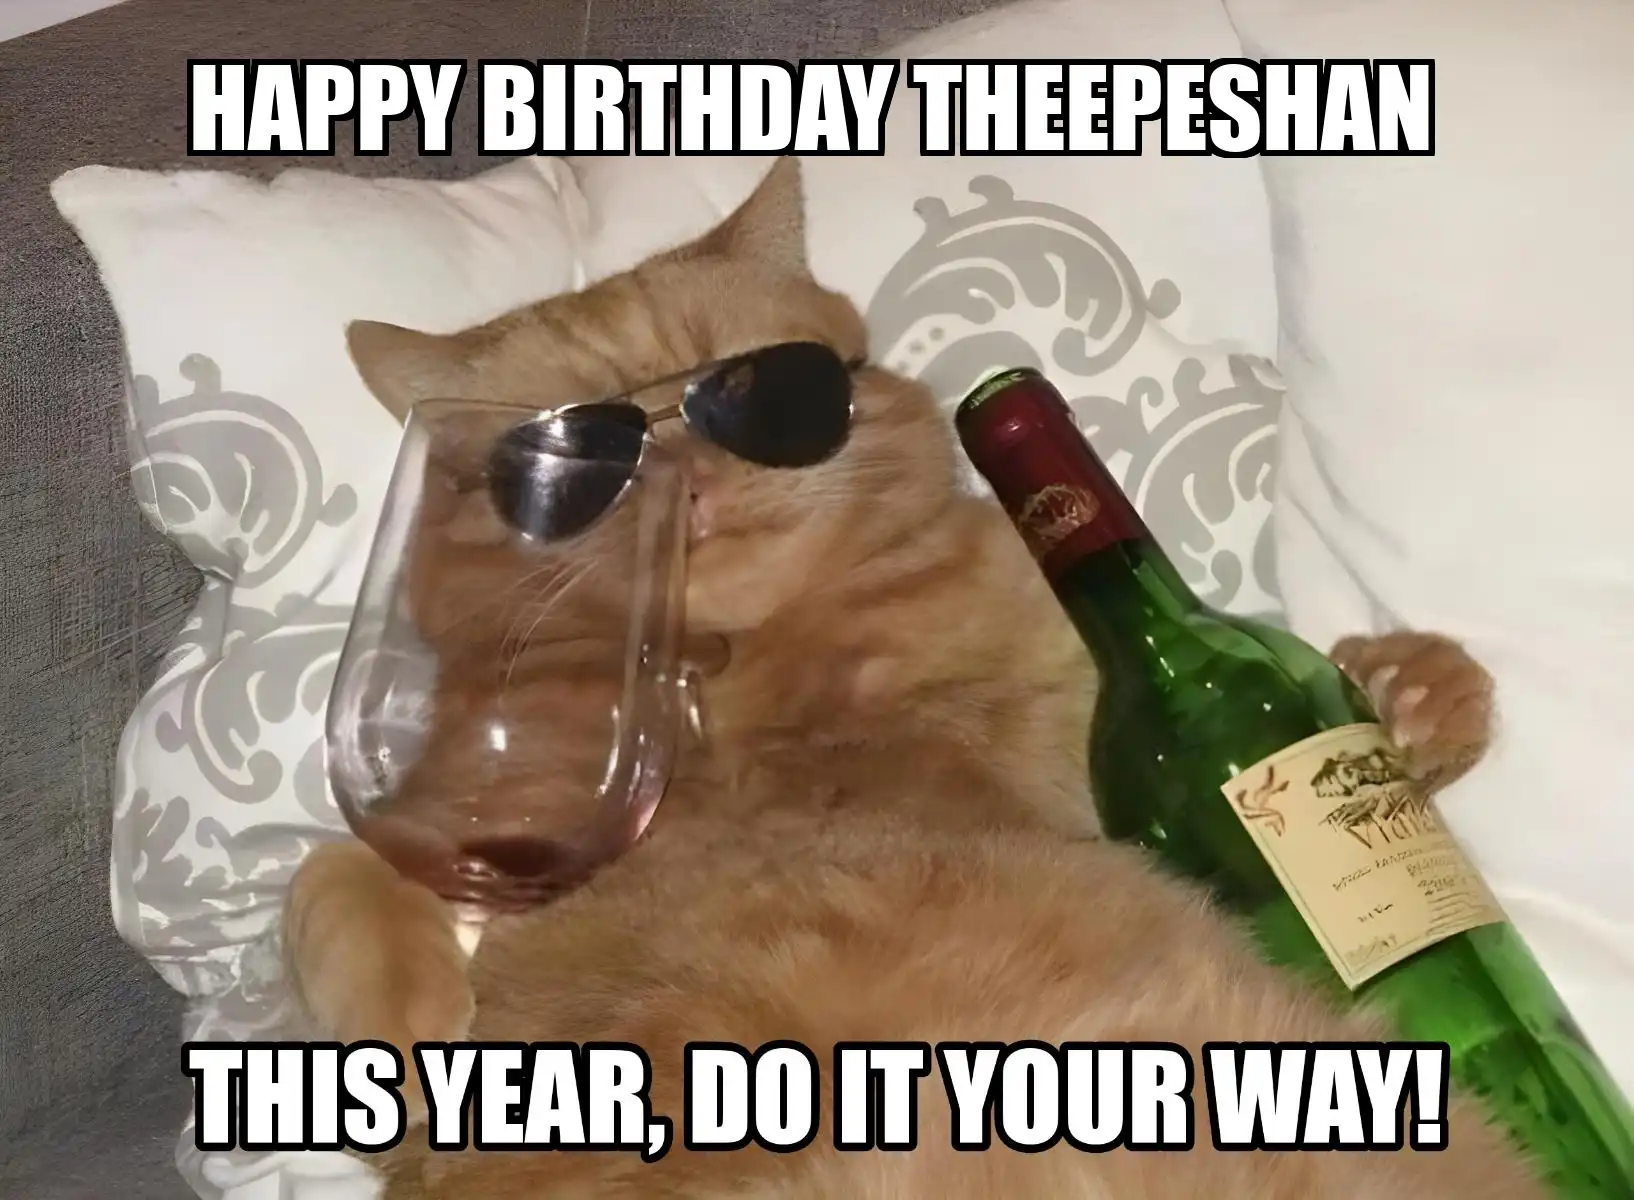 Happy Birthday Theepeshan This Year Do It Your Way Meme